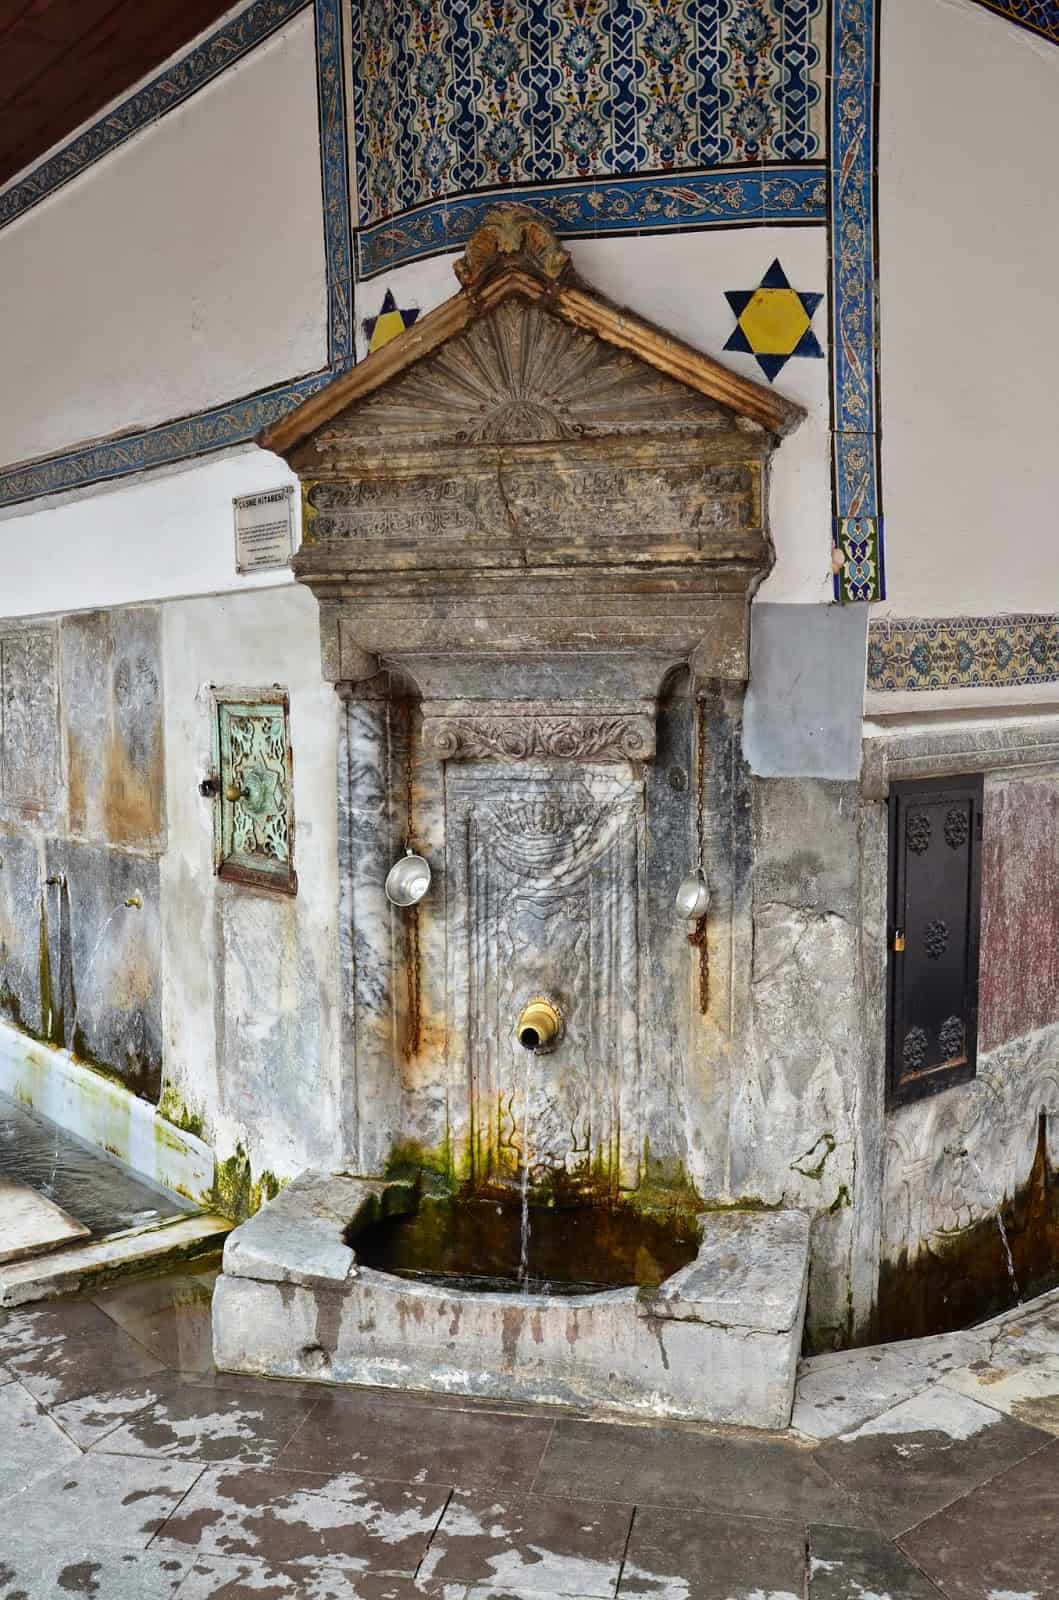 A public fountain attached to the ablutions fountain at the Great Mosque in Kütahya, Turkey